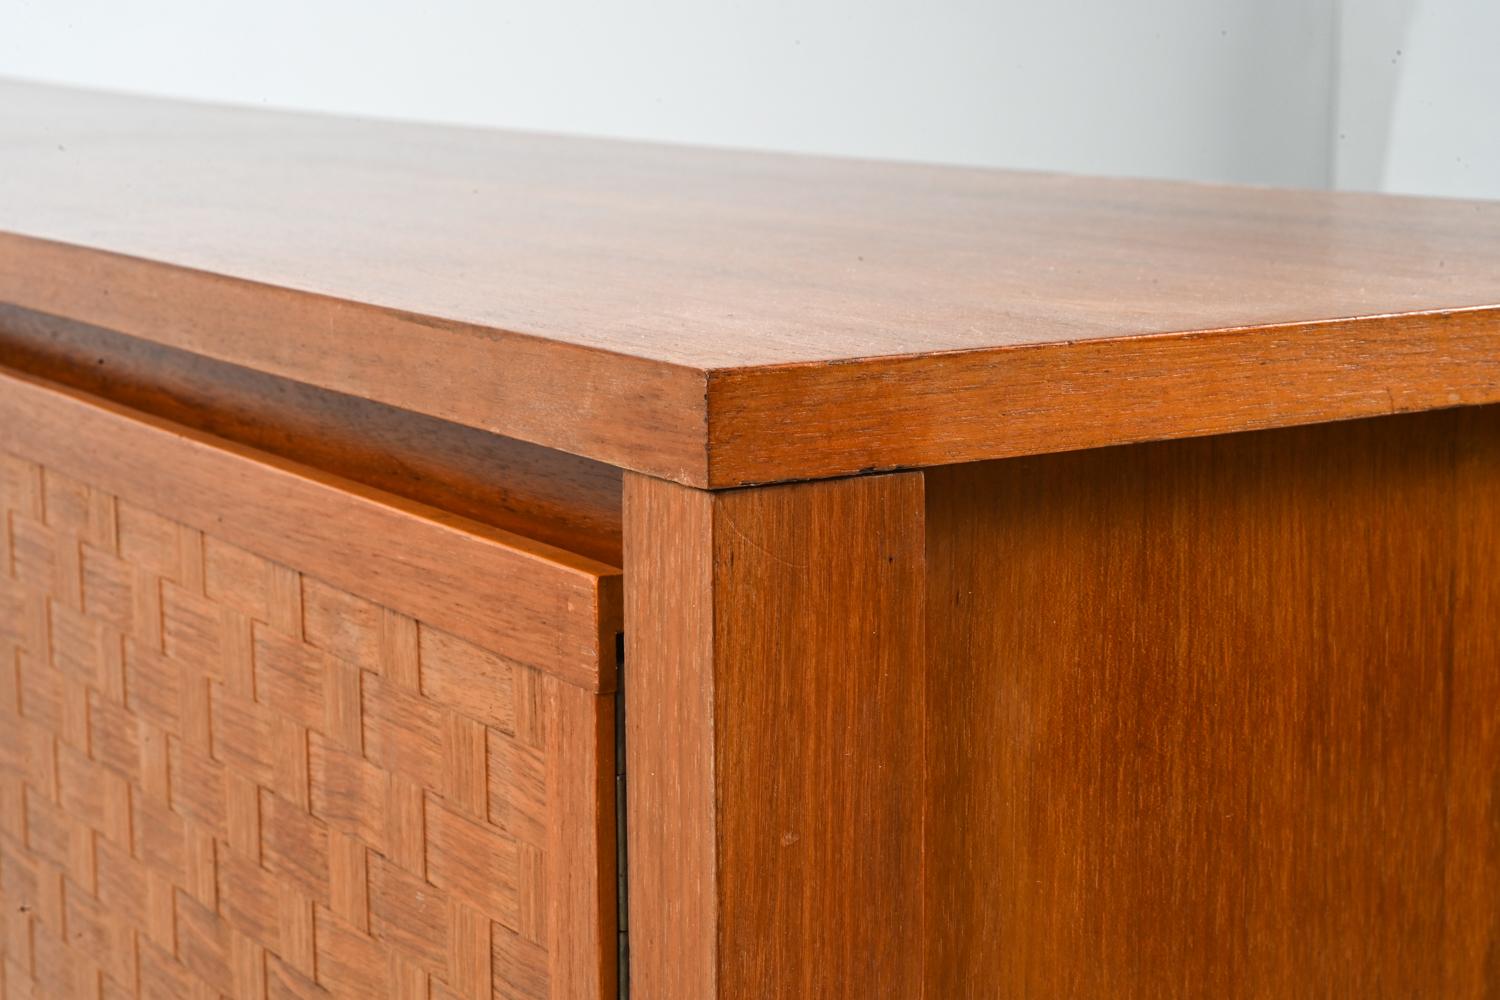 German Mid-Century Teak Woven-Front Sideboard by Leo Bub, c. 1960 For Sale 7